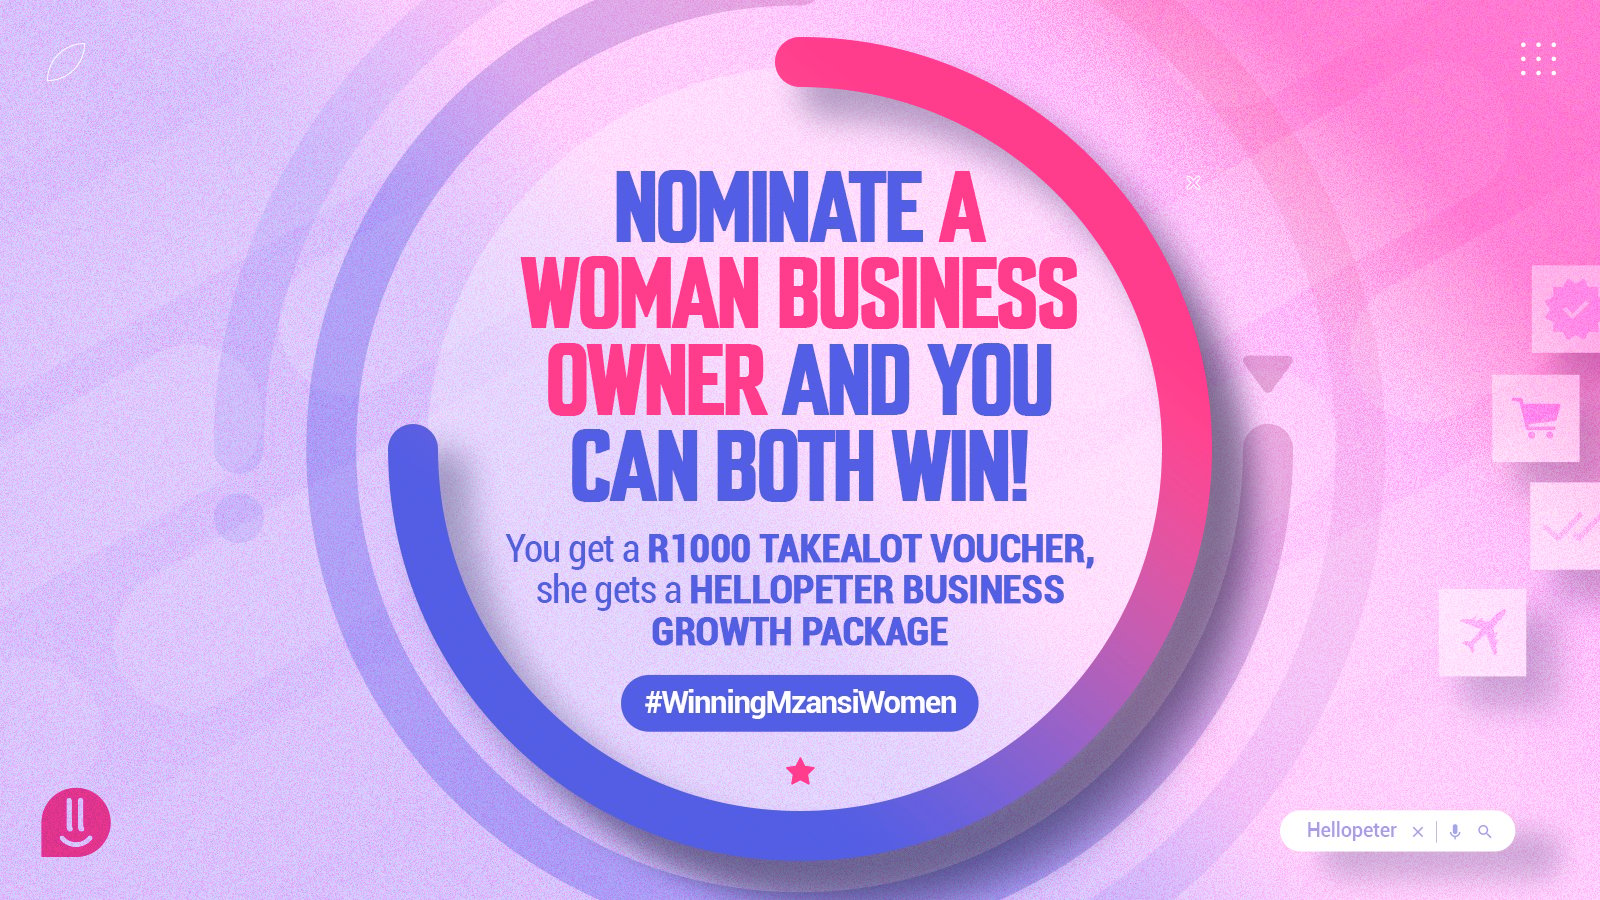 Women’s Month Giveaway Terms and Conditions #WinningMzansiWomen #HellopeterWomeninBusiness This prize draw is organised and promoted by Hellopeter and in no way sponsored, endorsed or administered by, or associated with, Facebook, Twitter or any other Social Network. You are providing your information to Hellopeter and not to any other party. The information provided will be used in conjunction with the Hellopeter Privacy Policy. Only reviews with more than 50 words or 250 characters will be considered. Reviews must be for genuine service or product experience in the last 60 days. Deleted reviews don't count. This competition is open to residents of South Africa 18 years and older except employees of Hellopeter and their close relatives and anyone otherwise connected with the organisation or judging of the competition. Prizes are not redeemable for cash. Hellopeter reserves the right to substitute any prize for another prize of like value at any time and any reason beyond its control requiring this. The prize may itself be subject to specific terms and conditions as imposed by the sponsor of the prize. The winner is solely responsible for complying with such terms and conditions. If the winner is chosen and there are noted irregularities (i.e. the person does not exist, is not delivered to a person, or is forwarded to a person with a different identity etc.) the winner will be disqualified and a new winner will be drawn. The decision of Hellopeter will be final and binding in this regard, and no correspondence shall be entered into regarding the decision. If Hellopeter is unable to contact a prize winner within 7 (seven) days after the winner has been selected, Hellopeter reserves the right to pick another winner. No prizes may or shall be awarded to any person who is a director, member, partner, employee or agent of, or consultant to, Hellopeter (or its holding company, subsidiaries and/or any affiliated company to Hellopeter) or to the supplier of any goods or services in respect of the competition or any person otherwise associated with the prize draw (each a "Promoter") and/or any family member of a Promoter and none of the aforementioned persons are eligible to enter the prize draw. There is no entry fee and no purchase necessary to enter this competition. By entering this competition, an entrant is indicating his/her agreement to be bound by these terms and conditions. Only one entry will be accepted per person. Multiple entries from the same person will be disqualified. The closing date for entry will be 1 September 2022 at midnight. After this date, no further entries to the competition will be permitted. The winners will be notified via registered Hellopeter email only, and the prizes will be issued as soon as possible. Each participant, by submitting an entry into the prize draw, consents to his/her details being published on social media for purposes of confirming that a winner has been selected for a specific prize draw (should he/she be selected as a prize winner). Hellopeter further reserves the right to use entrants' and winners' journey and results with Hellopeter for analysis and marketing purposes. The business who has accepted the Hellopeter Growth Package prize hereby confirms consent to Hellopeter having access to relevant information relating to their profile on Hellopeter Business. Hellopeter is authorised to publish any such materials to show how the platform has assisted the winning business over the entire year that they have access to the G1 Hellopeter Package. The results from the prize plan and all related information are owned by Hellopeter as part of this competition and may be used in future marketing campaigns or case studies as Hellopeter sees fit. Non-participation in the usage of the product and following strategies crafted by the Hellopeter team can at any point result in the immediate cancellation of the prize and plan with the business in question’s account being deleted from Hellopeter. No responsibility can be accepted for entries not received for whatever reason. Participants accept that if they breach these rules, they will be disqualified, and their prizes will be revoked even if the prize has been issued prior to discovering a breach of these terms and conditions. Under no circumstances will Hellopeter (or its holding company, subsidiaries and/or affiliated companies to Hellopeter) be liable for any losses, damages, costs or expenses arising from or in any way connected with any errors, defects, interruptions, malfunctions or delays in the promotion or the prize. Should any problem arise with the prize(s), it is the responsibility of the prize manufacturer or sponsor to undertake any repairs or maintenance, and Hellopeter accepts no liability in this regard. Any problems arising from physical damage or neglect to prizes on the part of the prize winner or their acquaintances will not be covered by the manufacturer's warranty or Hellopeter. It is your responsibility to ensure that your entry is received by us prior to the closure of the competition. Any entries received after the closing date of the competition will not be eligible to participate, regardless of the reason for the late entry. Hellopeter accepts no responsibility for any errors of any other kind which may restrict or delay the sending or receipt of an entry or for delayed or lost entries. All communication between participants and Hellopeter will be via registered Hellopeter email address only. The responsibility of converting the prize in a safe manner sits solely with the winner, and Hellopeter takes no responsibility for any events after the handover. The winner/s will only be displayed on social media AFTER the official handover to avoid fraudulent activity. Should any fraudulent activity take place during the course of the competition, Hellopeter reserves the right to consult and/or open a case with the SAPS. Hellopeter reserves the right to cancel the competition at any time for either non-participation or any reasons deemed reasonable by Hellopeter without prior notice or public notice thereafter. The competition and these terms and conditions will be governed by South African law and any disputes will be subject to the exclusive jurisdiction of the courts of South Africa. The promoter will notify the winner when and where the prize can be collected / is delivered. The winner agrees to the use of his/her name and image in any publicity material, as well as their entry. Any personal data relating to the winner or any other entrants will be used solely in accordance with current [RSA] data protection legislation and will not be disclosed to a third party without the entrant's prior consent. Hellopeter shall have the right, at its sole discretion and at any time, to change or modify these terms and conditions, such change shall be effective immediately upon posting to this webpage. The winner will be responsible for any entry costs and additional costs incurred in taking advantage of (collecting or using) their prize. Winners will be randomly selected from a pool of eligible entrants. The winner will be notified by email and/or DM on Instagram/Facebook within 28 days of the closing date. The winner will only ever be contacted by Hellopeter. If the winner cannot be contacted or does not claim the prize within 7 days of notification, we reserve the right to withdraw the prize from the winner and pick a replacement winner. The rules of the competition and how to enter are as follows: How to Enter on Facebook: Like our page @hellopetercom and this post Write a review for a woman business owner on hellopeter.com and tag her in the comments below, explaining why she deserves to win. Get your friends and family involved, using the hashtags #WinningMzansiWomen and #HellopeterWomeninBusiness Remember that you can enter on Instagram @hellopeter_za too! How to Enter on Instagram: Follow @hellopeter_za and like this post Write a review for a woman business owner on hellopeter.com and tag her in the comments below, explaining why she deserves to win. Tag your friends and share the post to your story, using the hashtags #WinningMzansiWomen and #HellopeterWomeninBusiness Remember that you can enter on Facebook @hellopetercom too! 30. The promoter is not responsible for inaccurate prize details supplied to any entrant by any third-party connected with this competition. The prize is as follows: 1x R1000 Takealot voucher for the person who nominated the woman business owner AND 1x Hellopeter Business package consisting of: One-year Growth Package with support from a Customer Success team member for the nominated woman business owner.